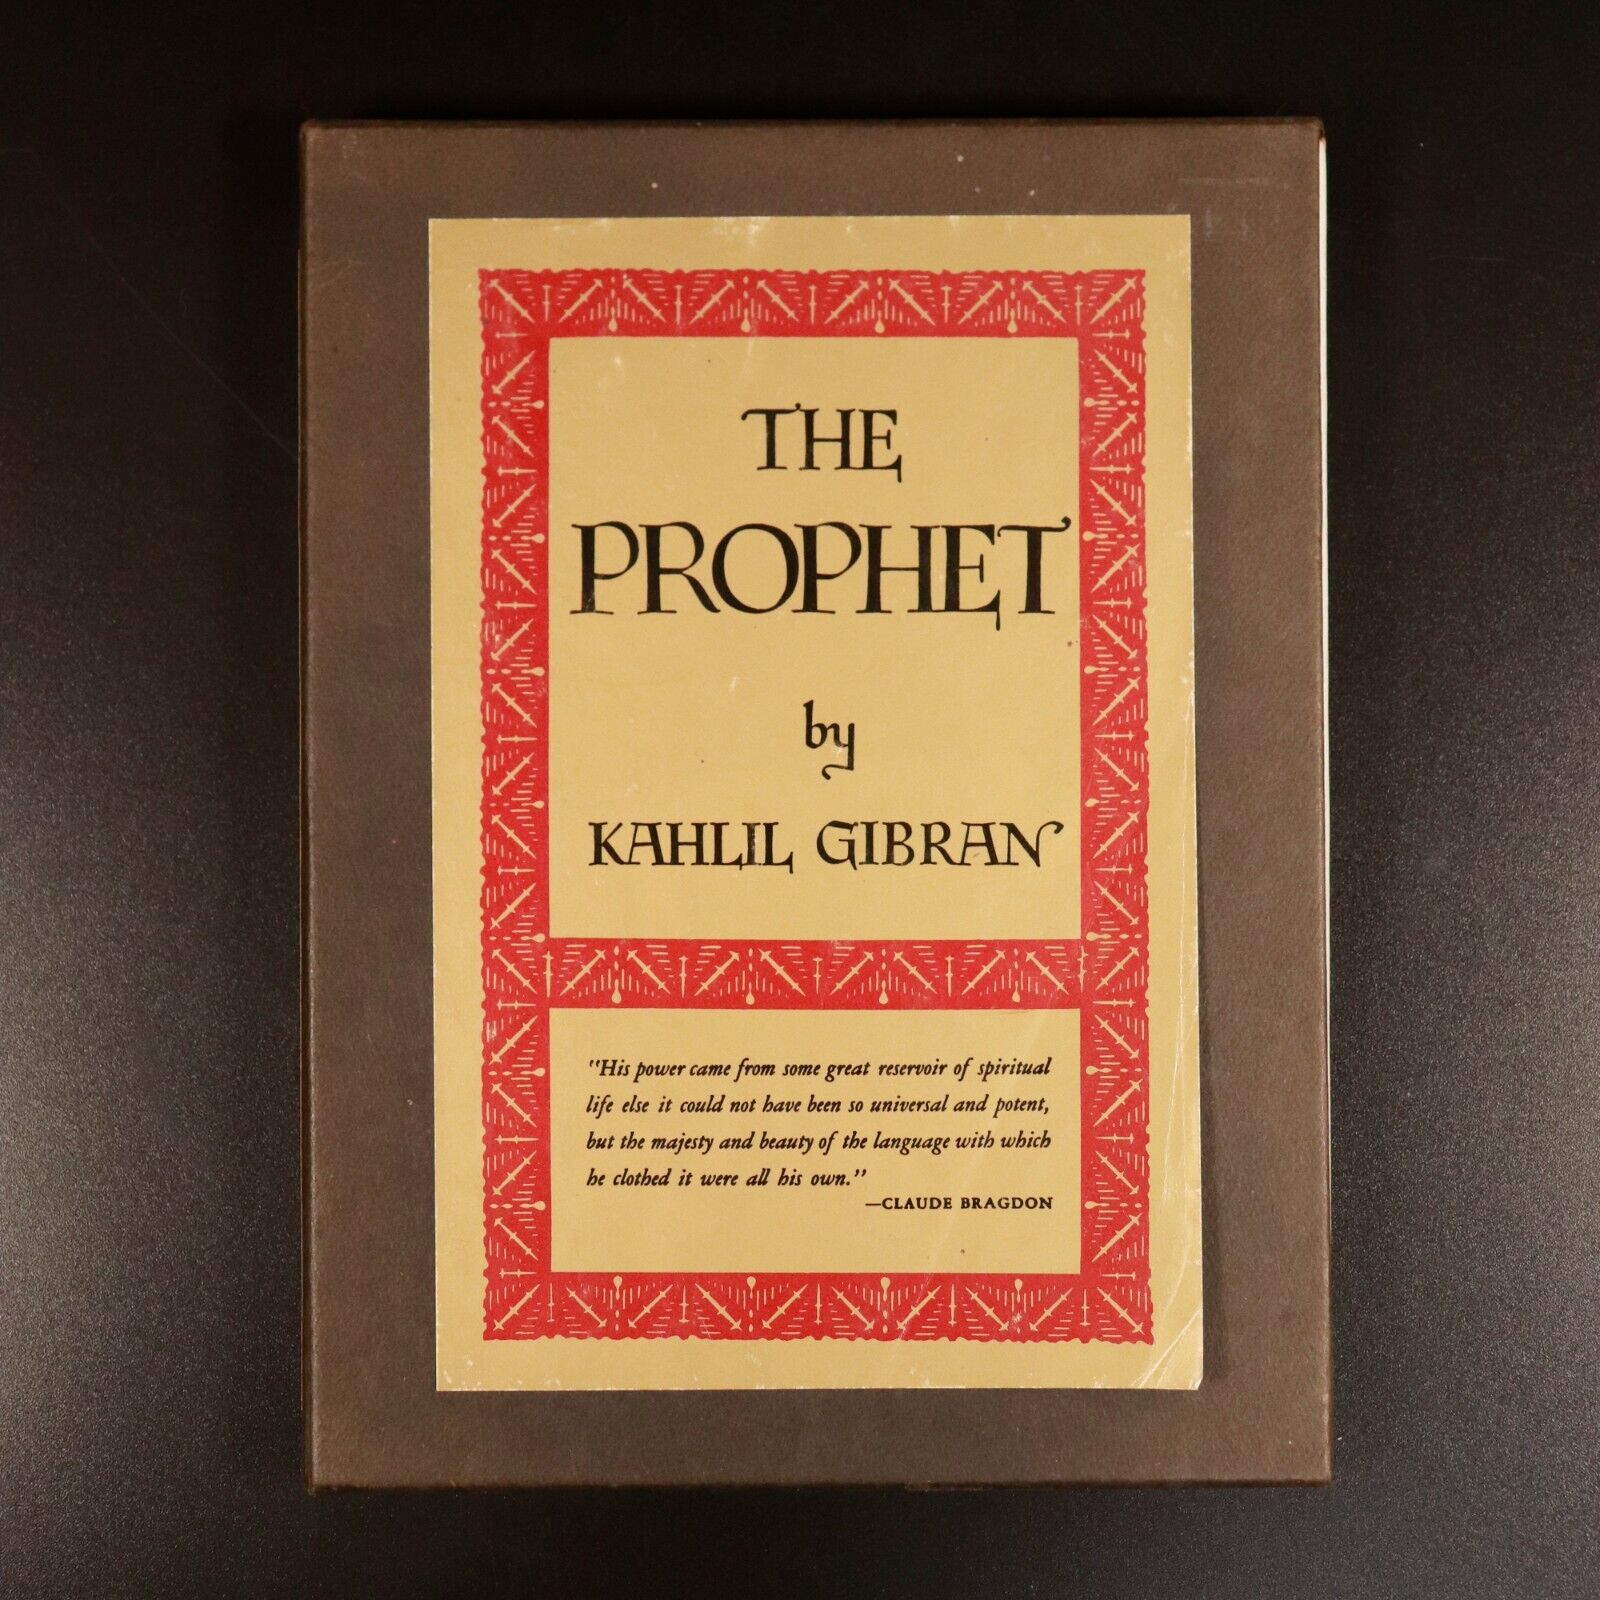 1978 The Prophet by Kahlil Gibran Illustrated Philosophy Book Alfred A. Knopf